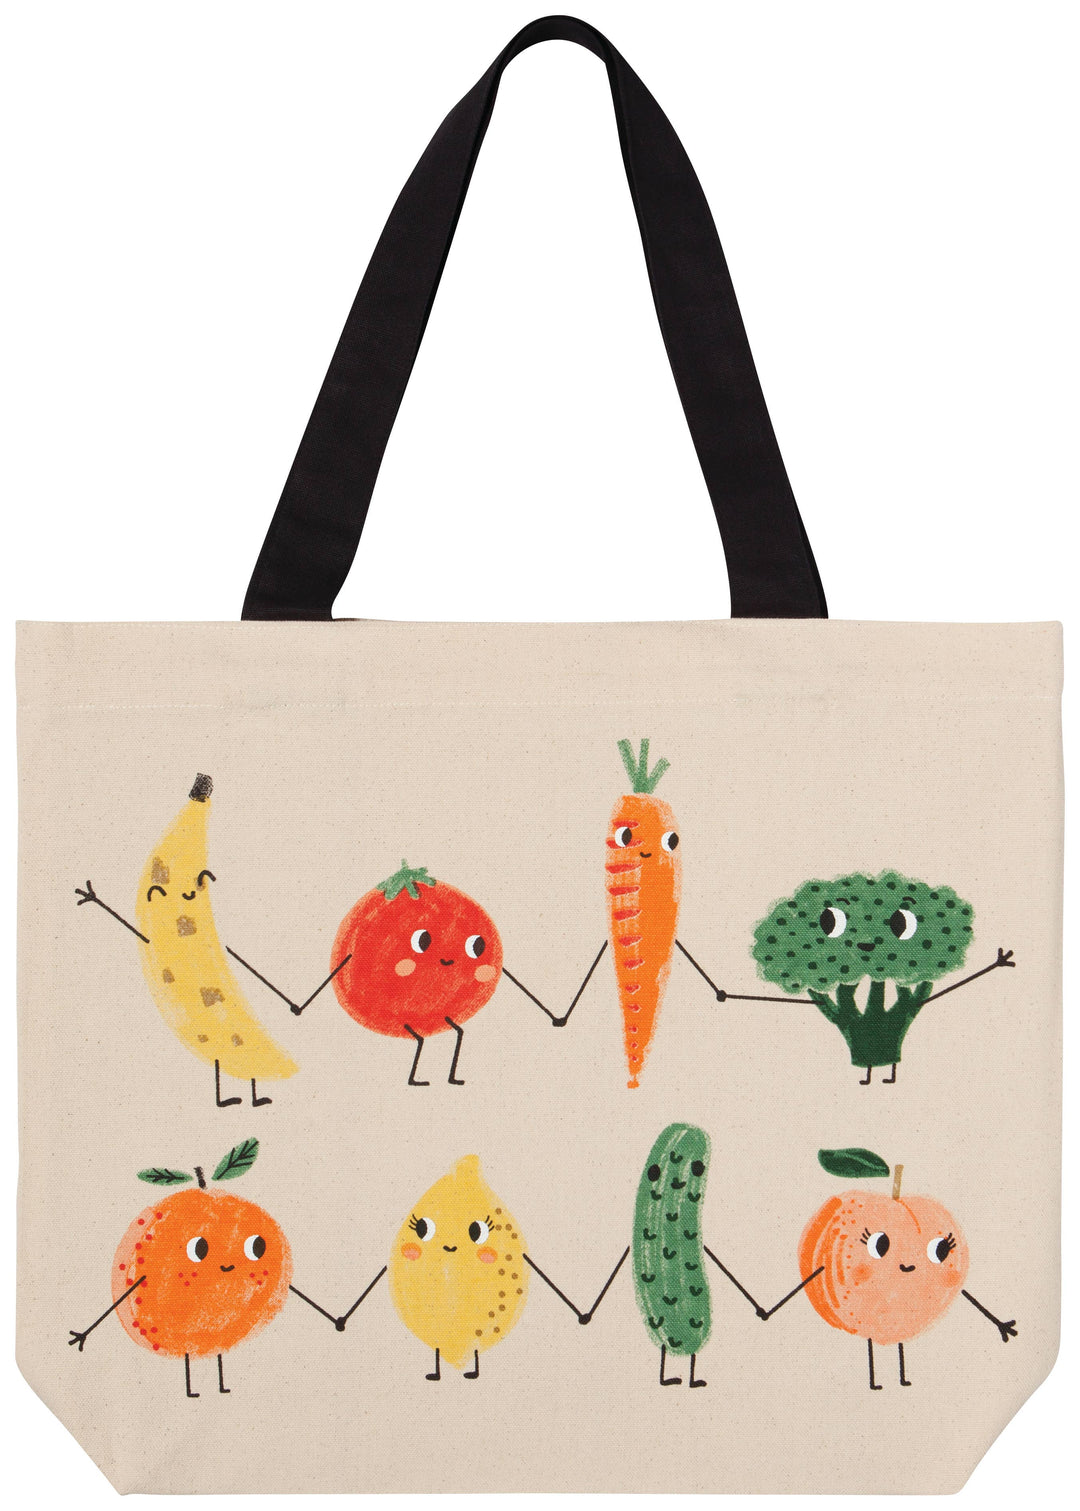 Funny Food Tote Bag - Merry Piglets